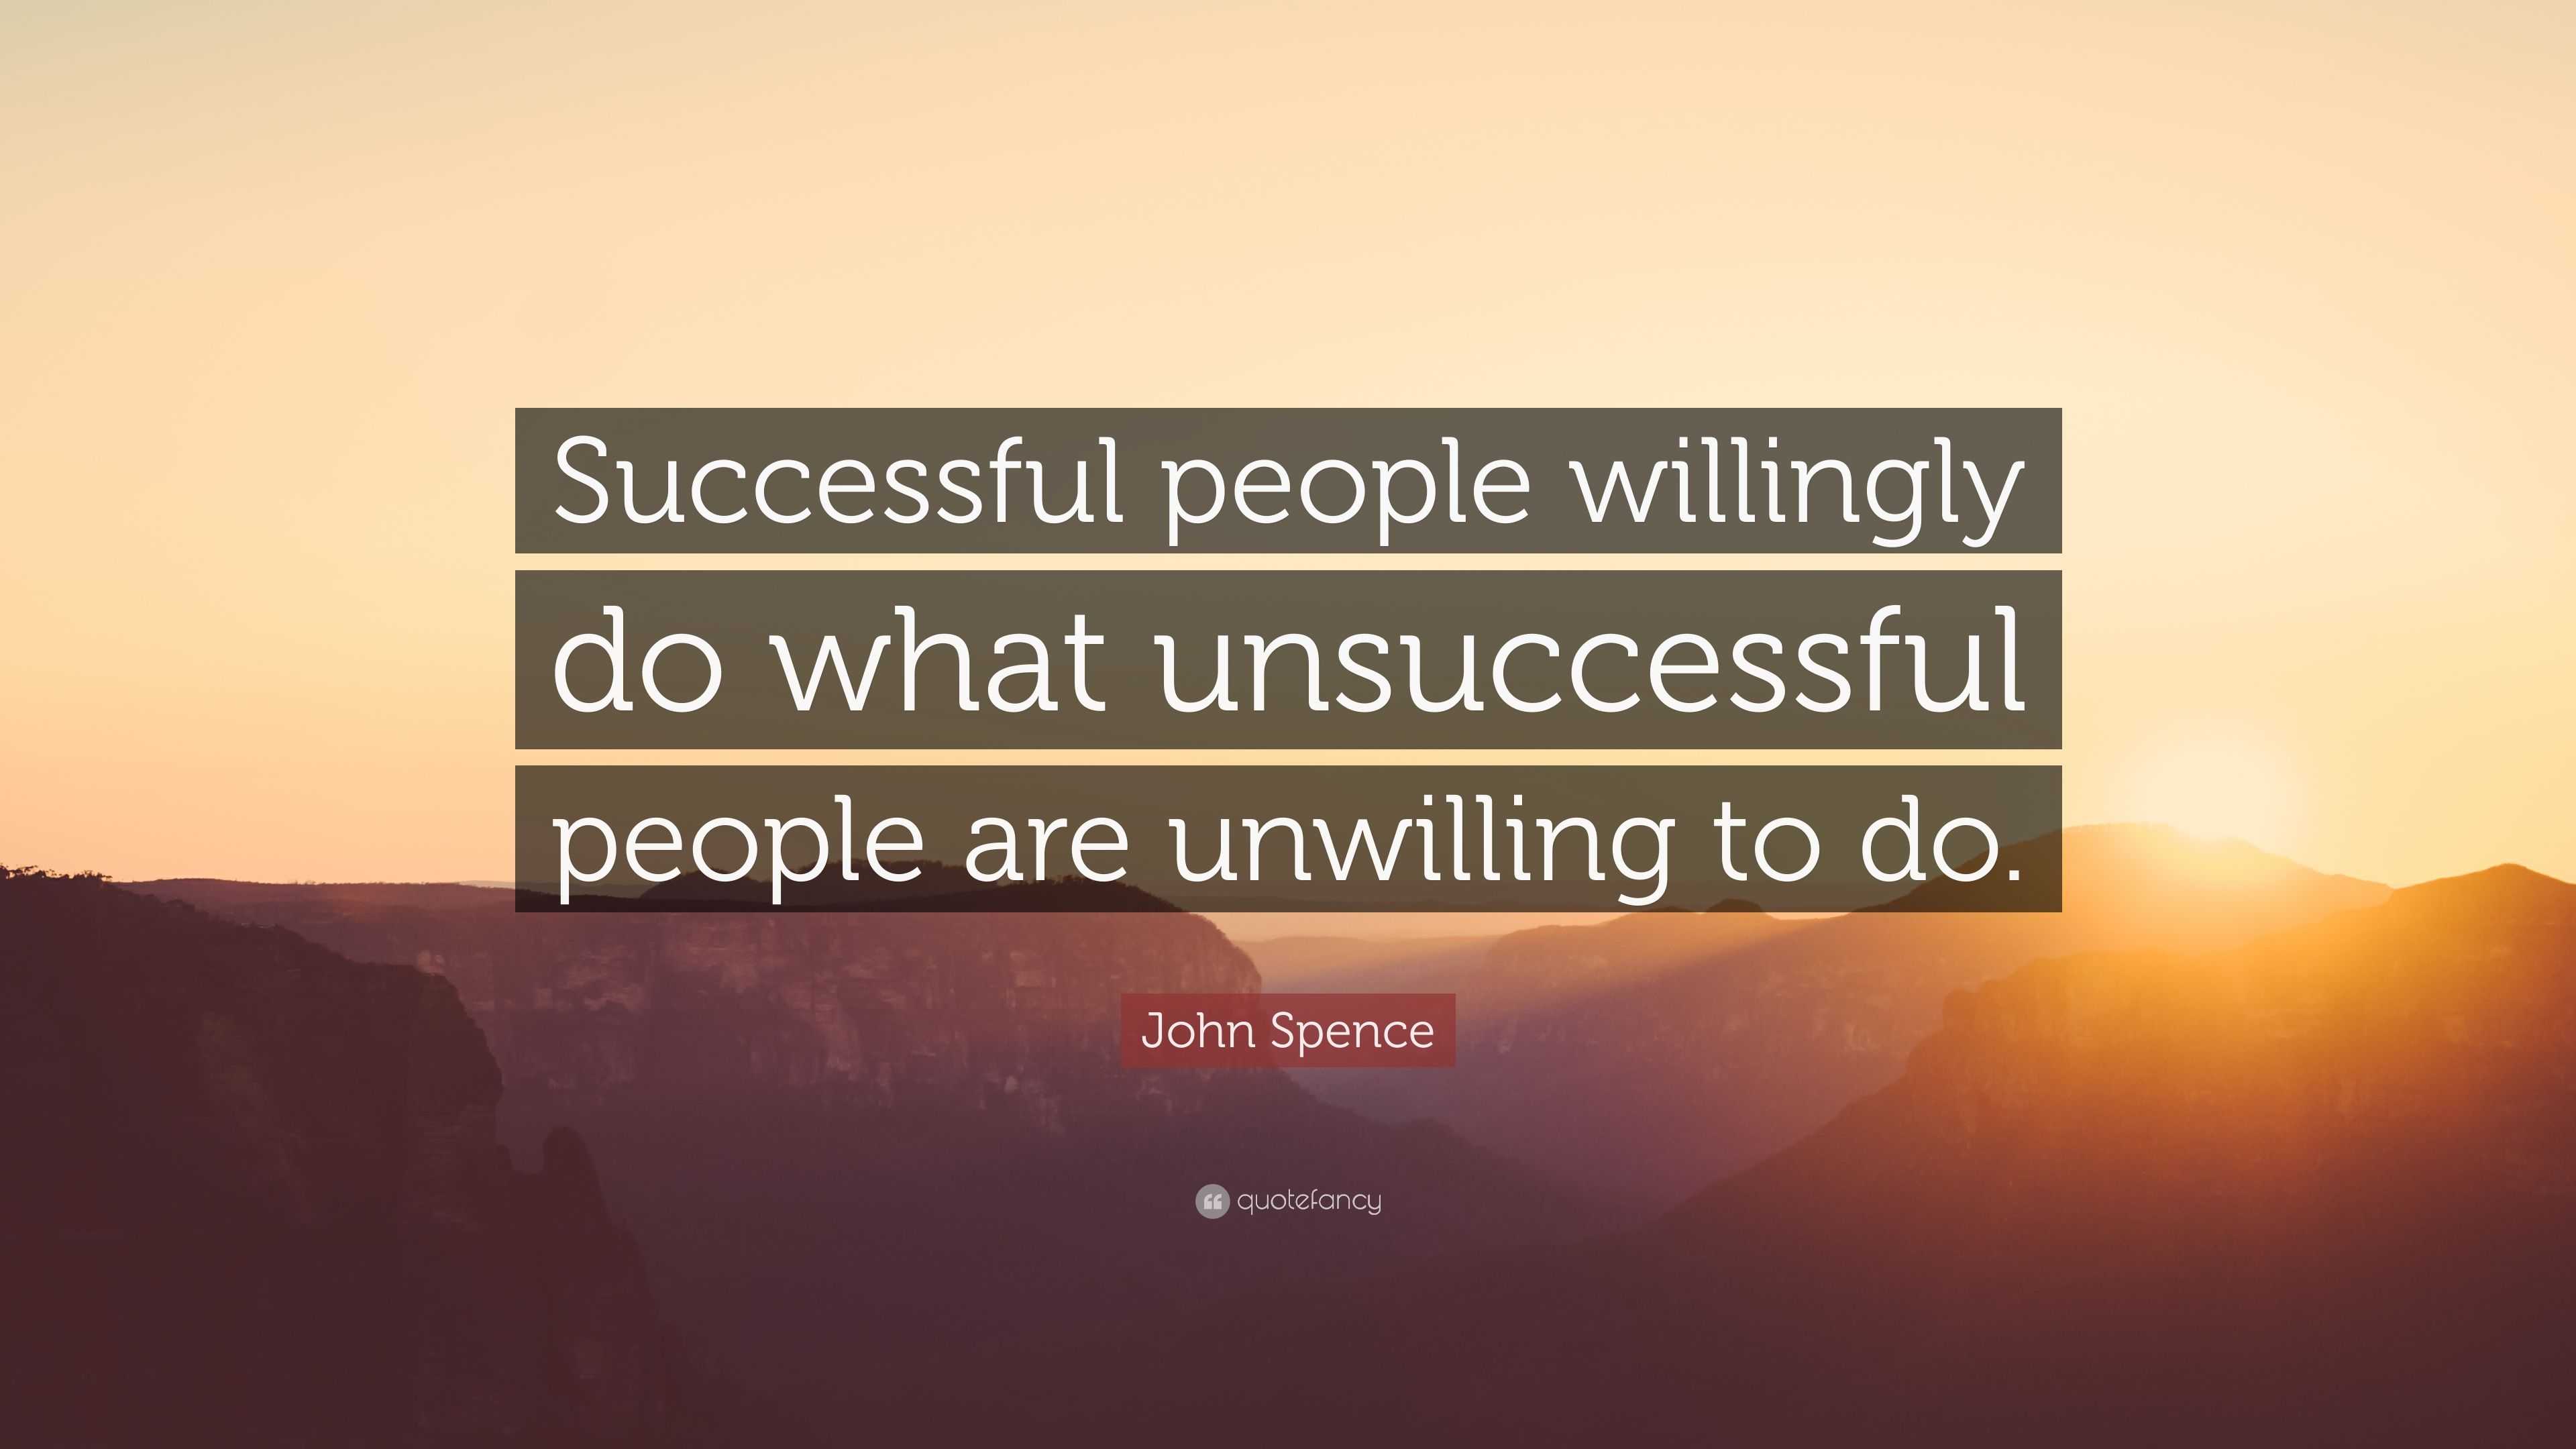 John Spence Quote: “Successful people willingly do what unsuccessful ...